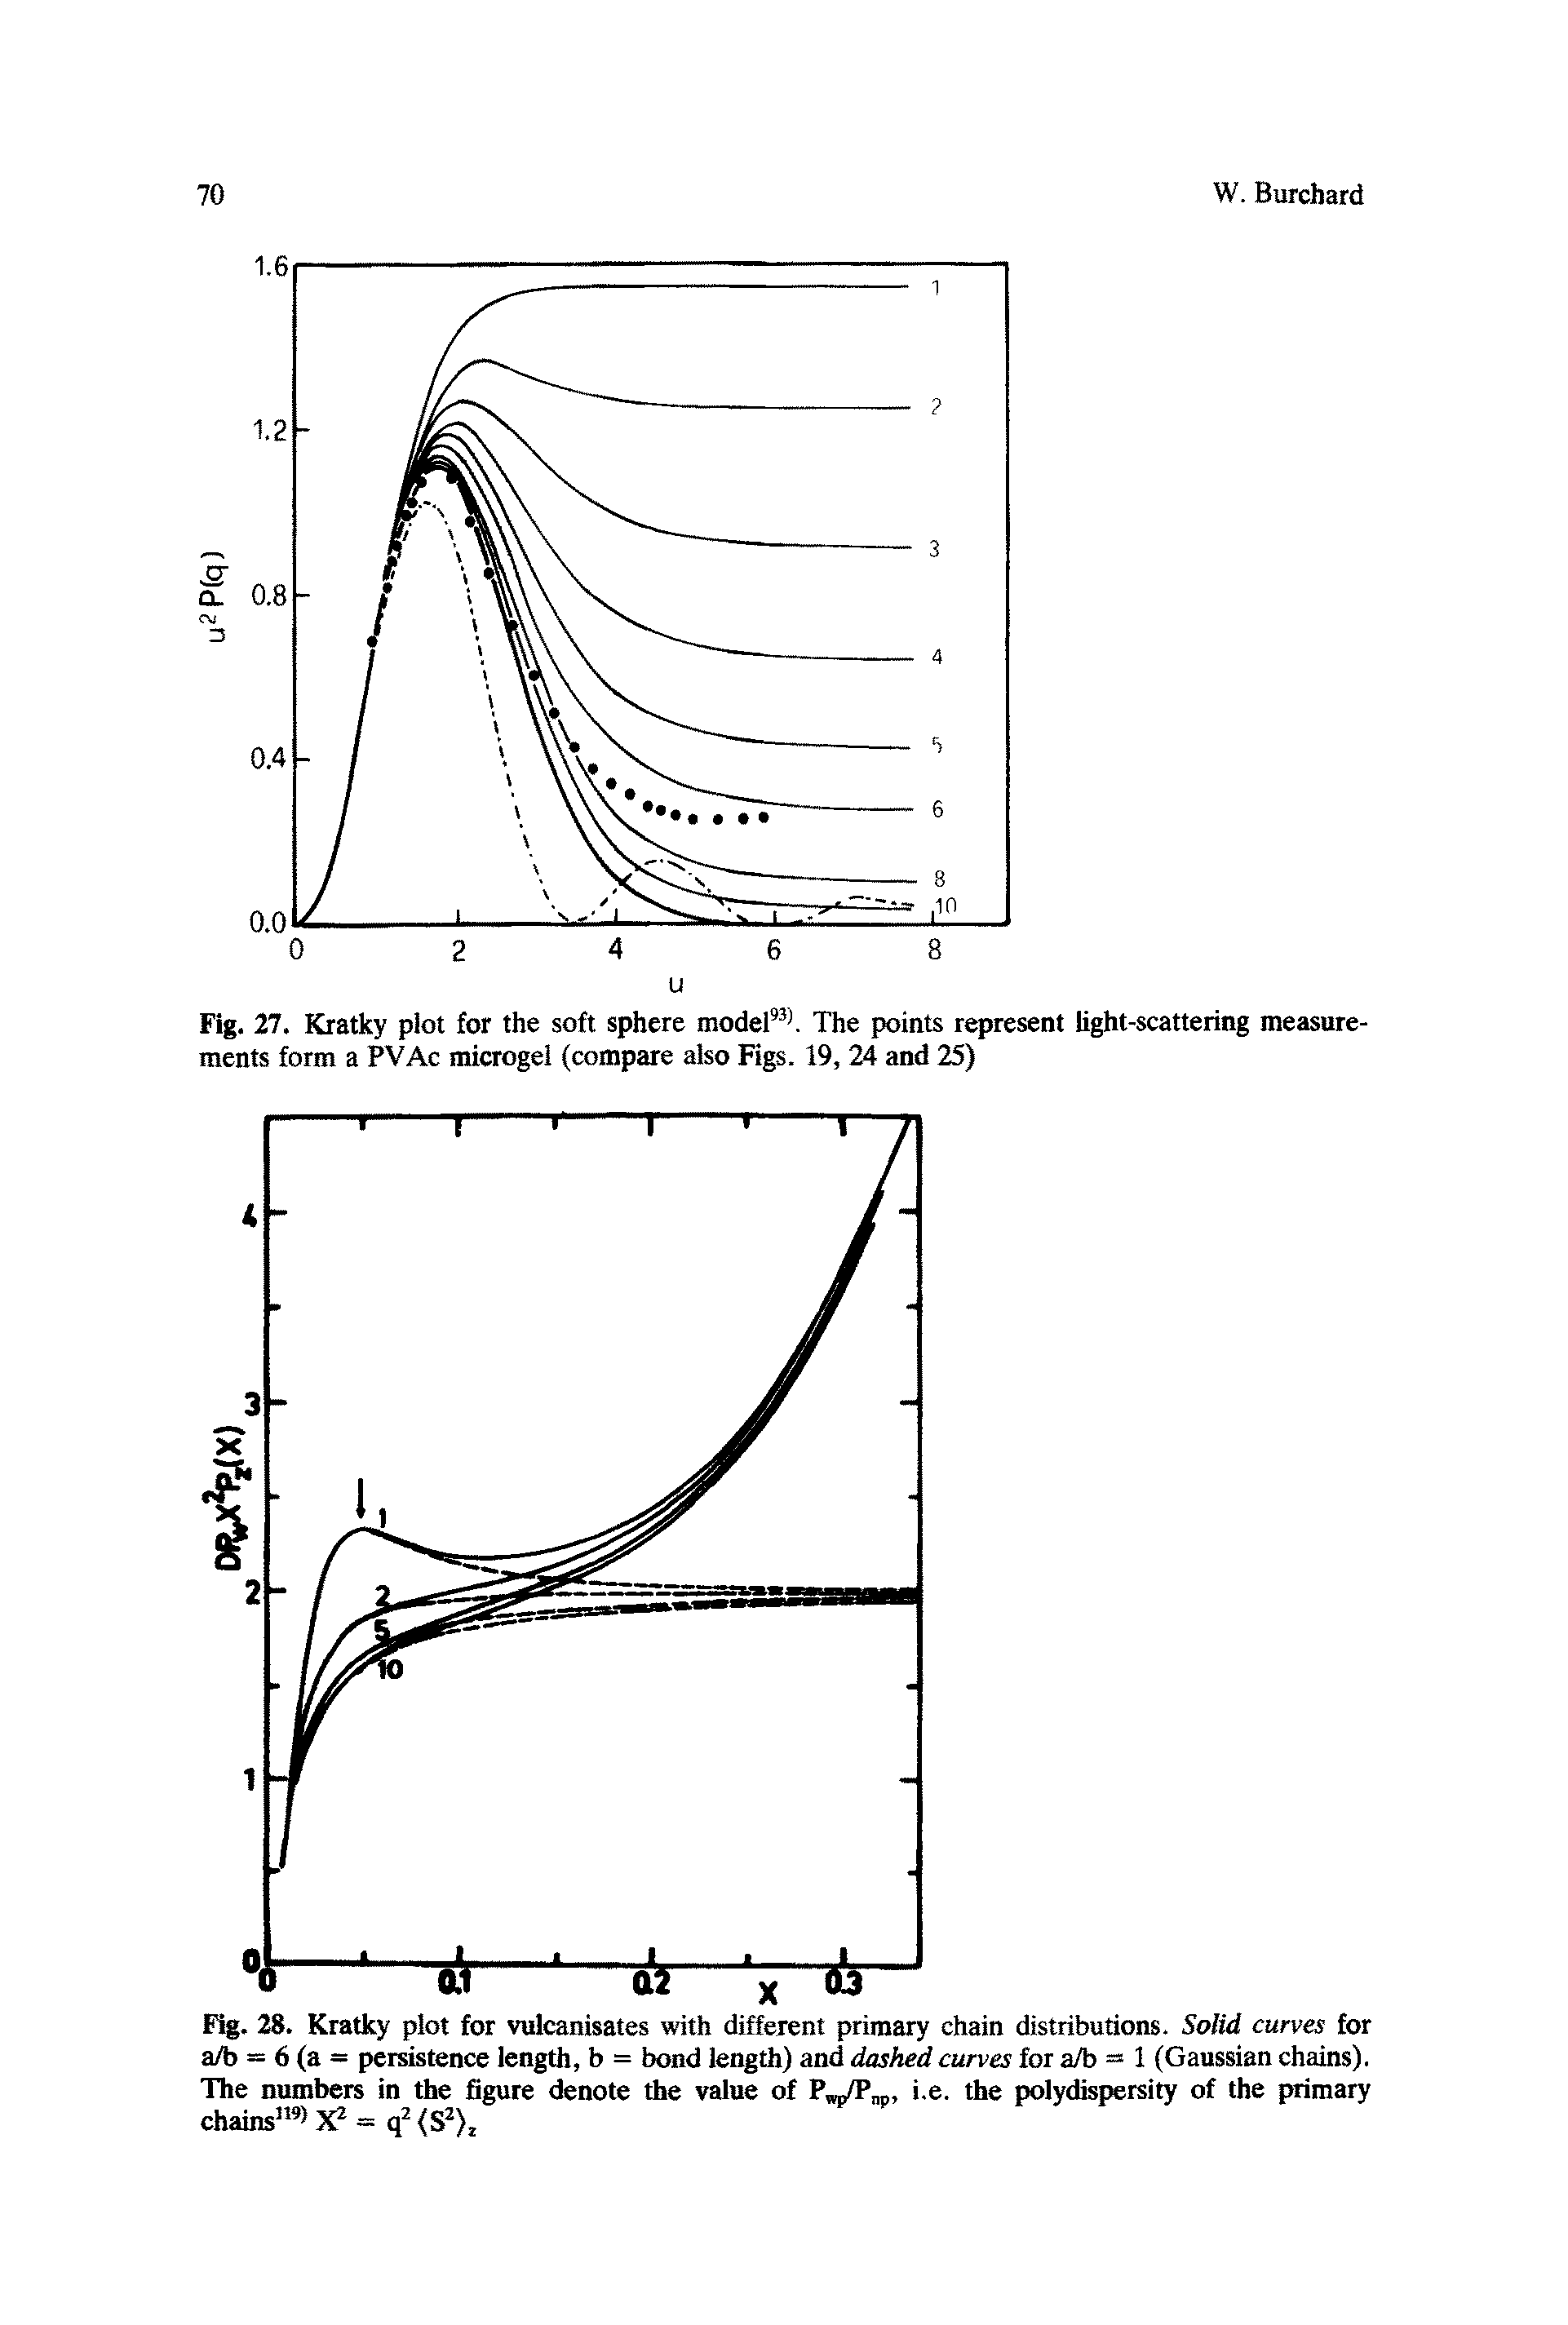 Fig. 28. Kratky plot for vulcanisates with different primary chain distributions. Solid curves for a/b = 6 (a = persistence length, b = bond length) and dashed curves for a/b = 1 (Gaussian chains). The numbers in the figure denote the value of Pwp/Pno, i.e. the polydispersity of the primary chains"9) X2 = q2(S2),...